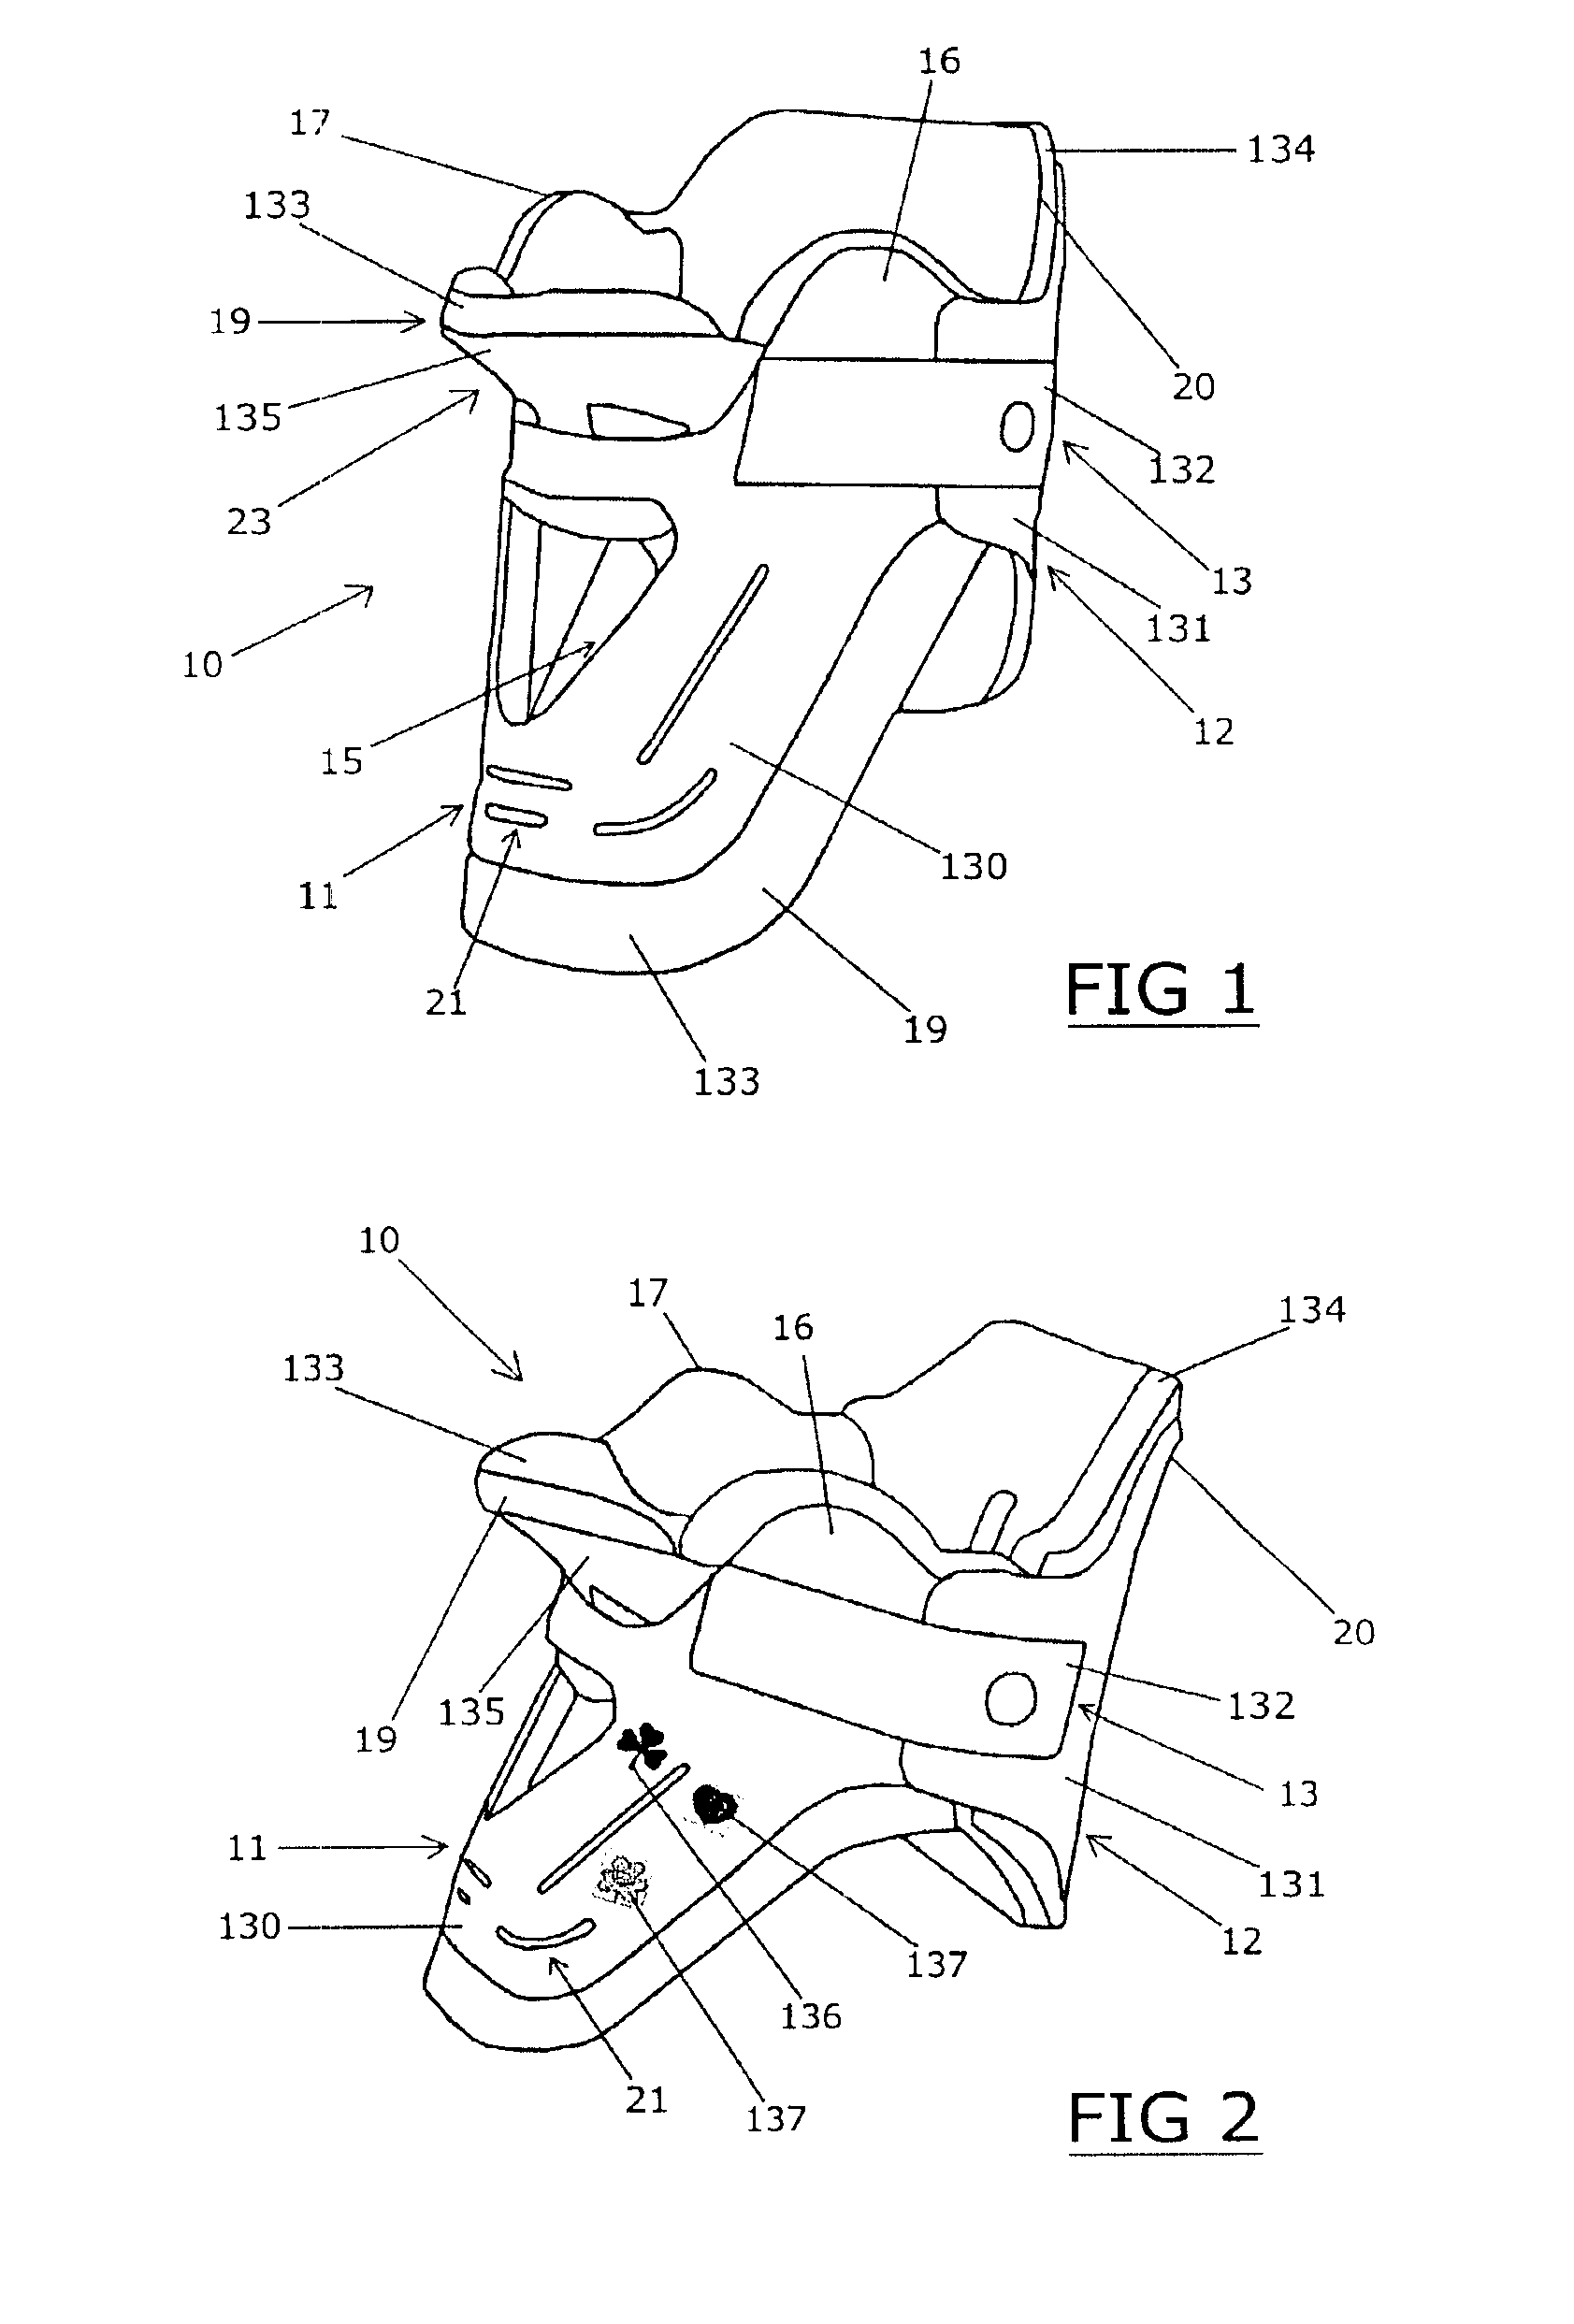 Cervical collar device